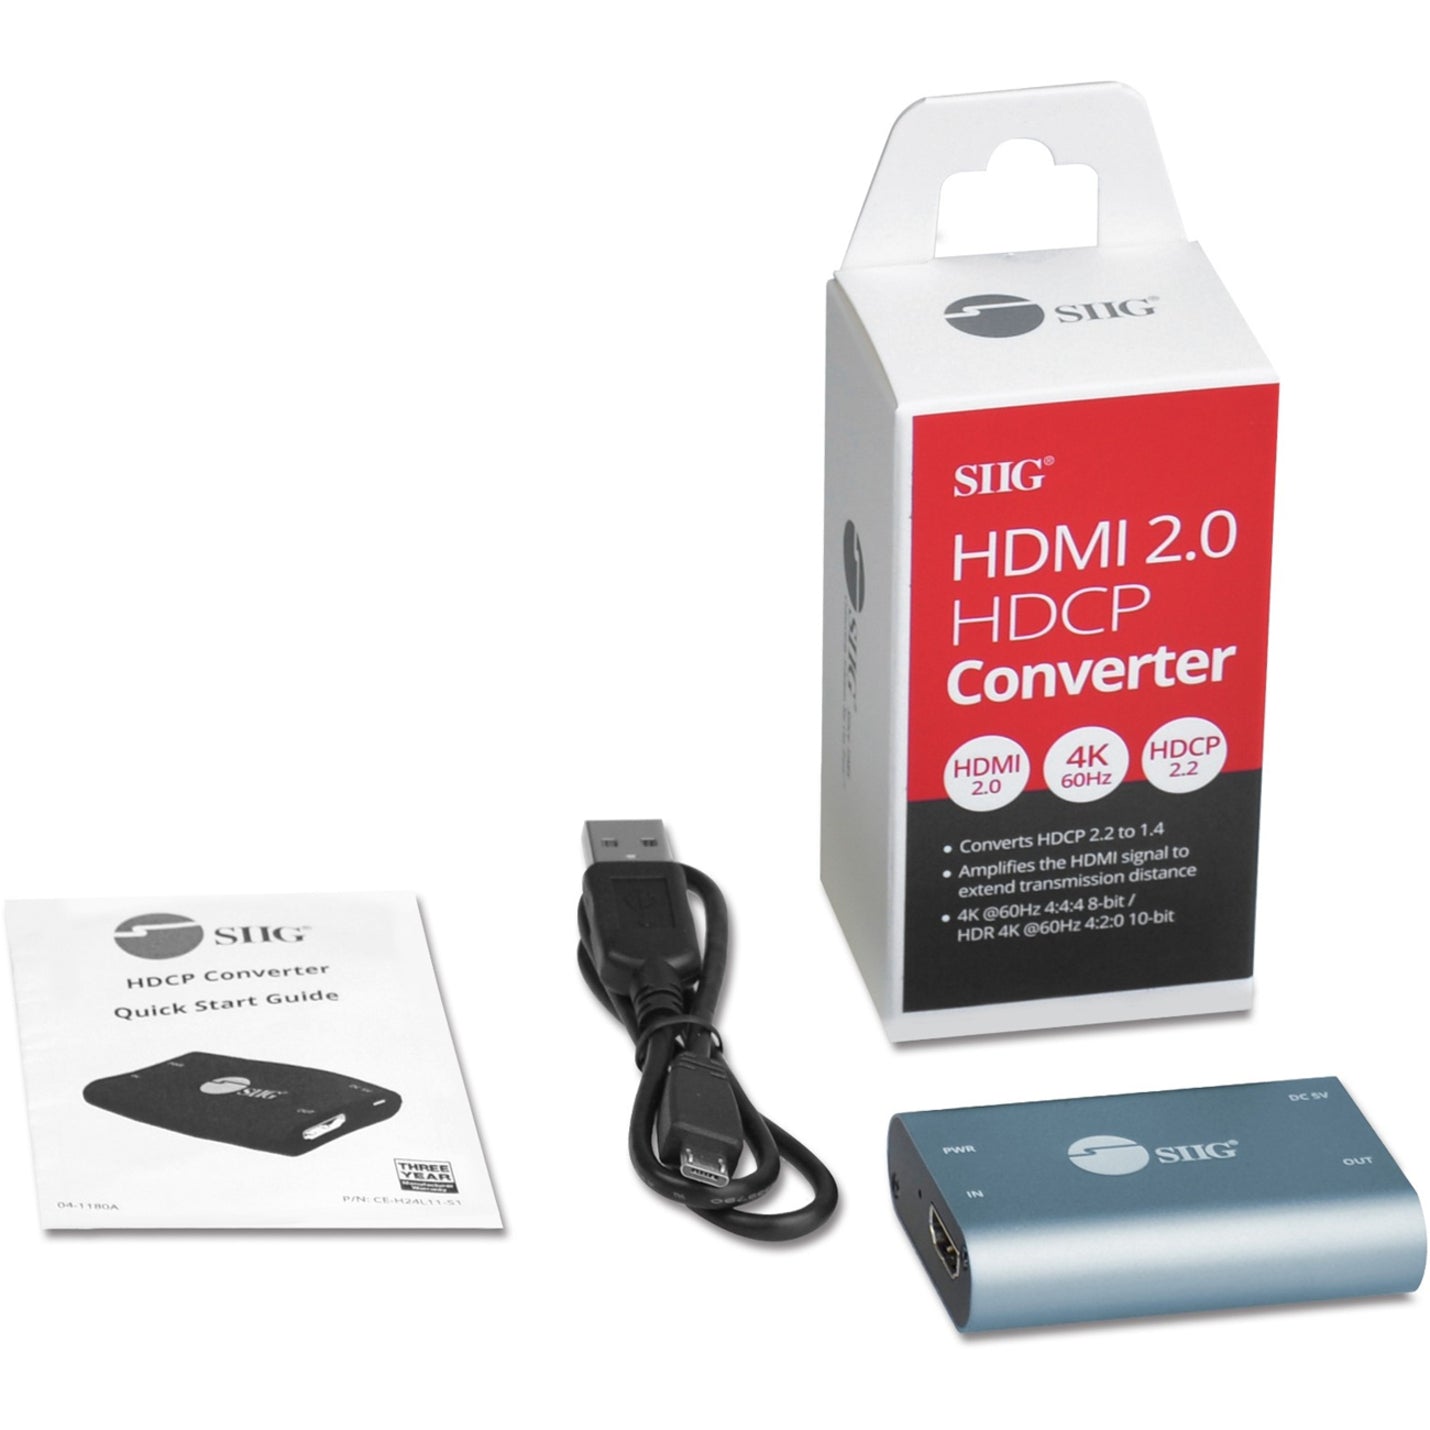 SIIG CE-H24L11-S1 HDMI 2.0 4K HDCP Converter, USB and HDMI Video Conversion